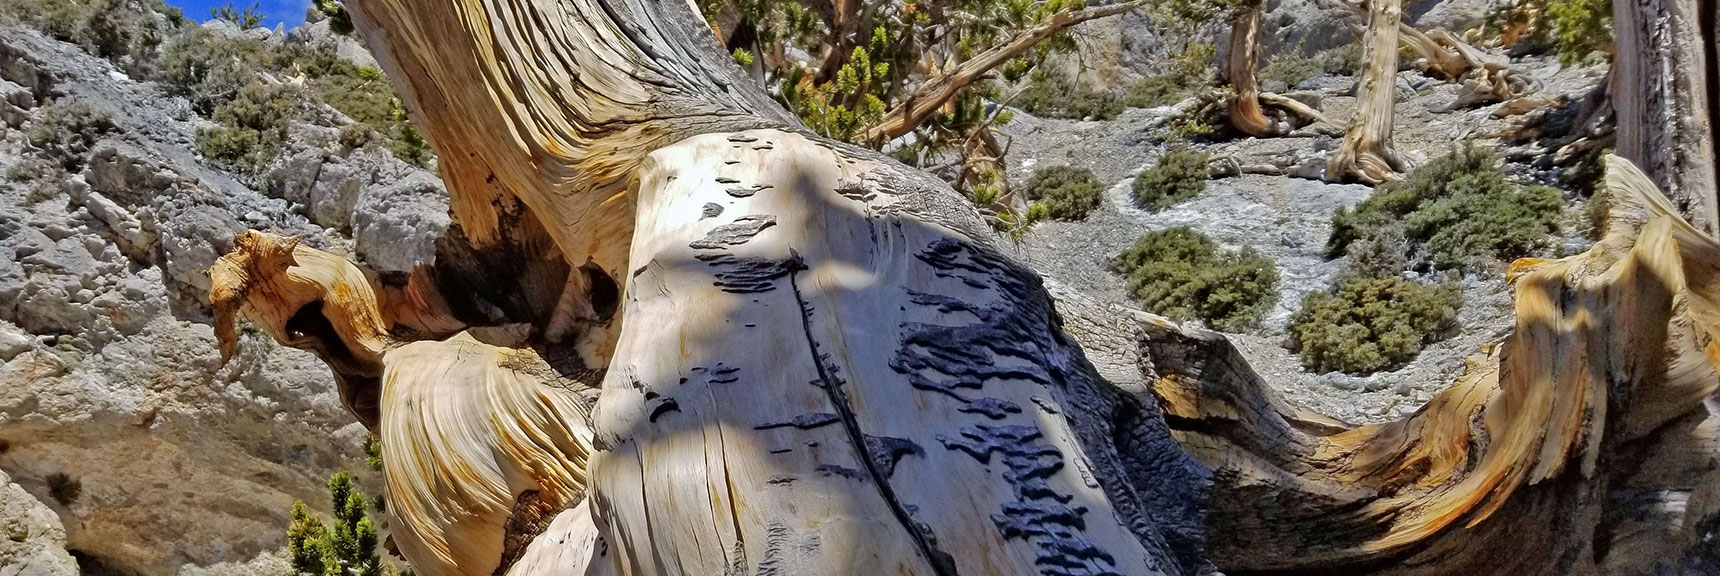 This Was a Massive Ancient Tree Between 1 and 2,000 Years Old | The Sisters South | Lee Canyon | Mt Charleston Wilderness | Spring Mountains, Nevada